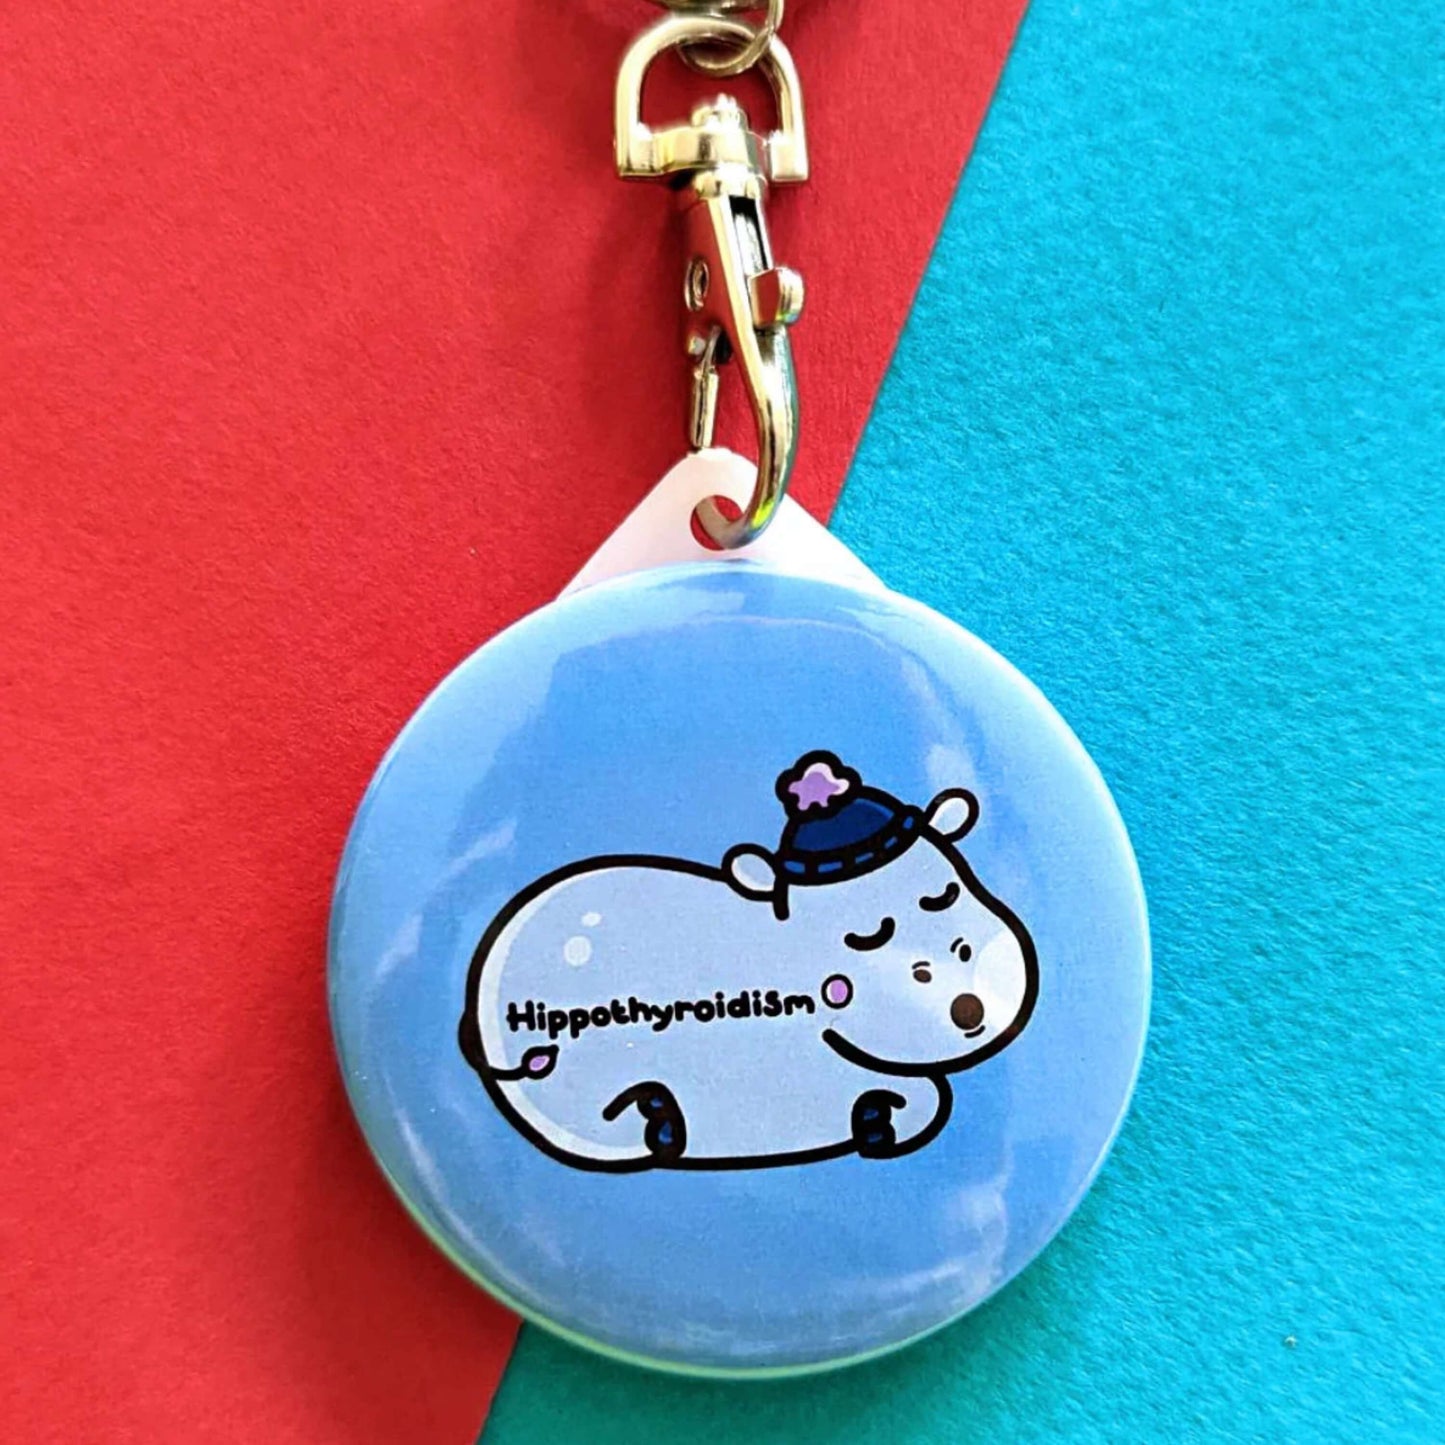 Hippothyroidism Keyring - Hypothyroidism on a red and blue background. The circular blue key ring has an illustration of a sleeping hippo wearing a blue wooly hat with Hippothyroidism written across its body. The hand drawn design is made to raise awareness for Hypothyroidism.